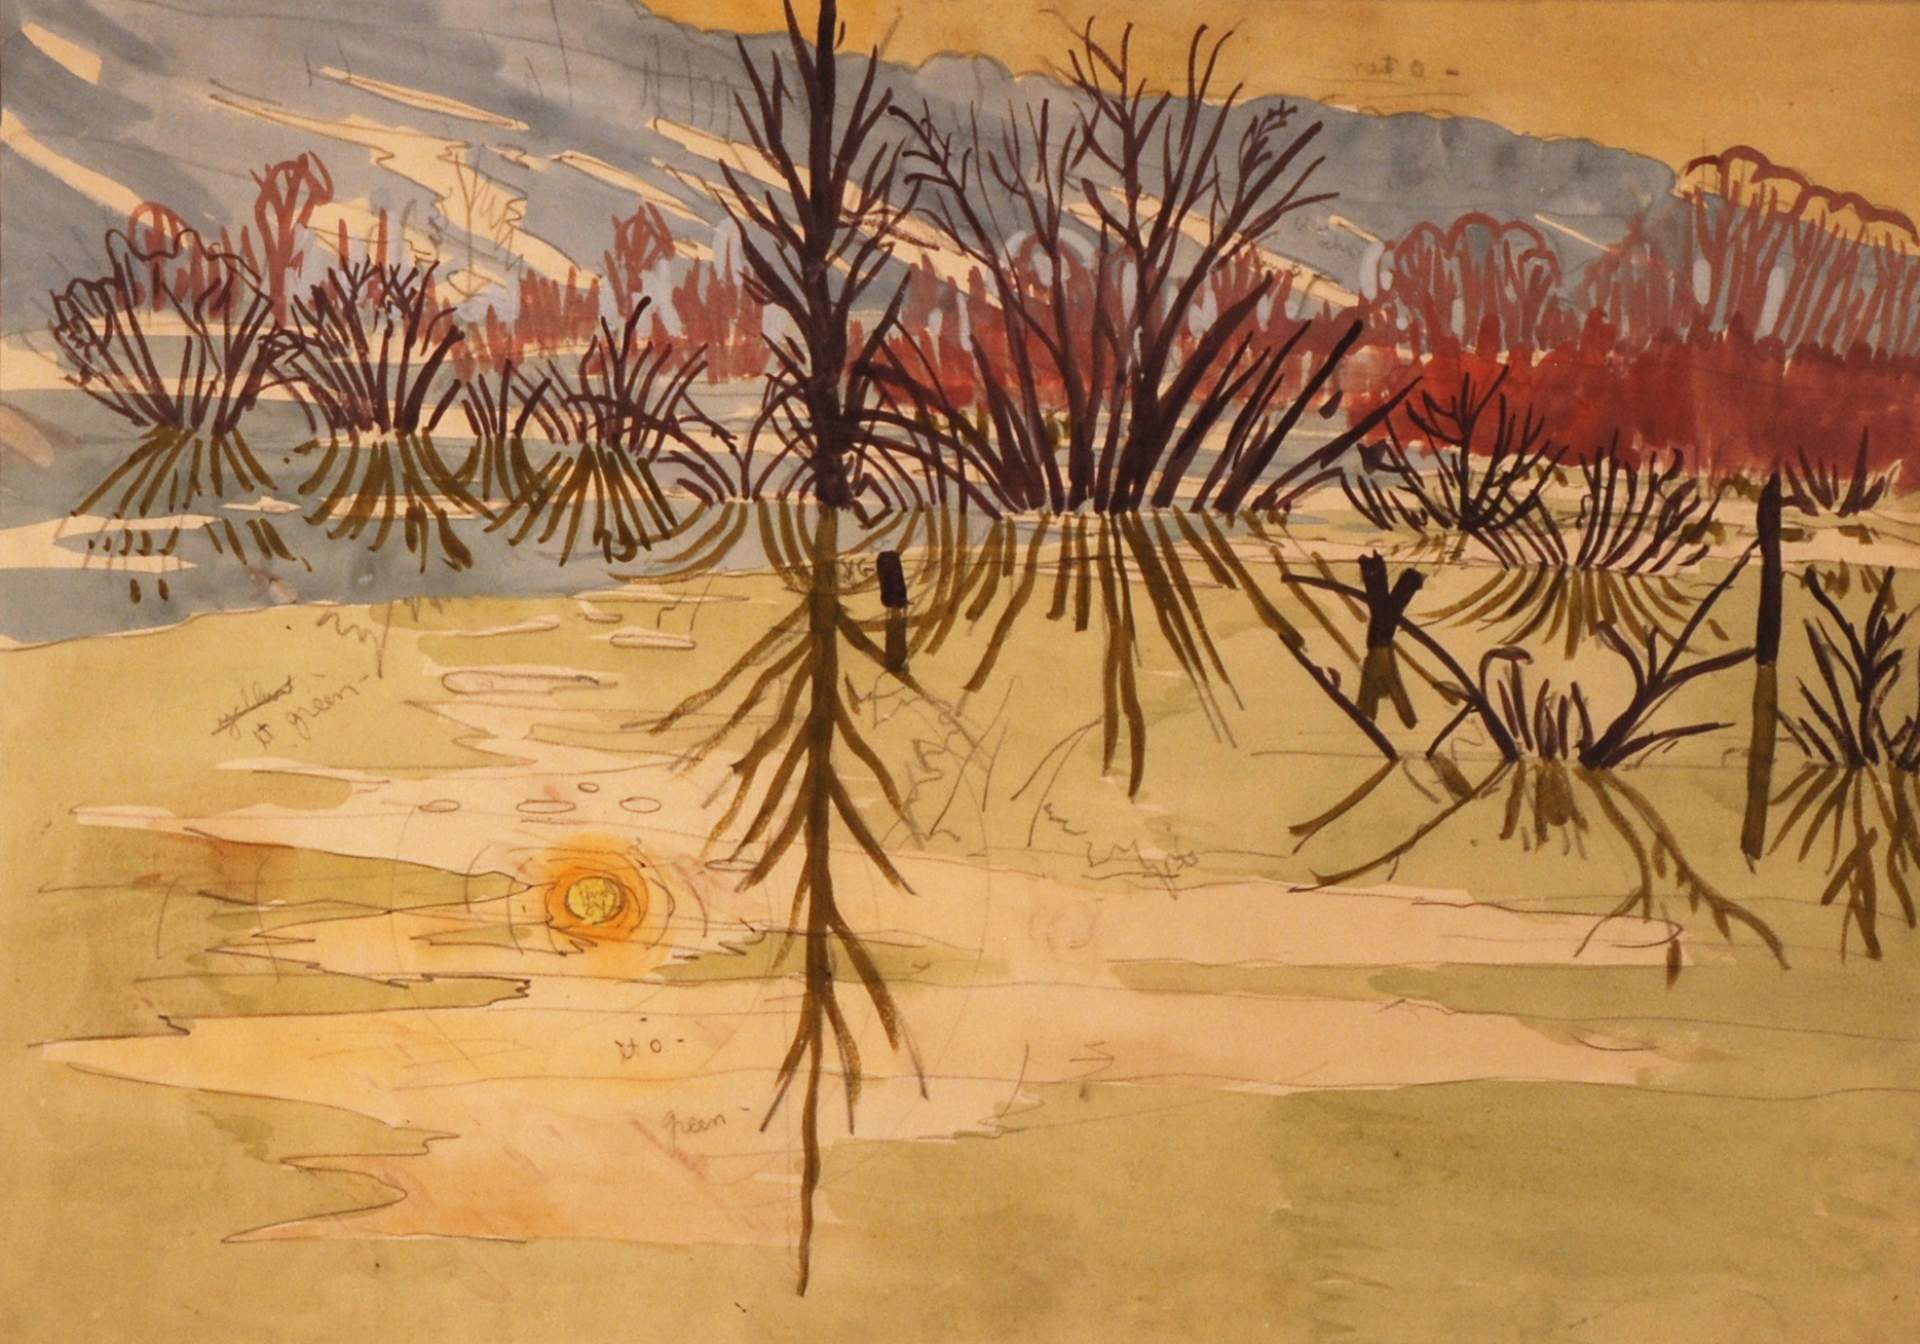 Works by Charles E. Burchfield. A Tribute from Tony Sisti